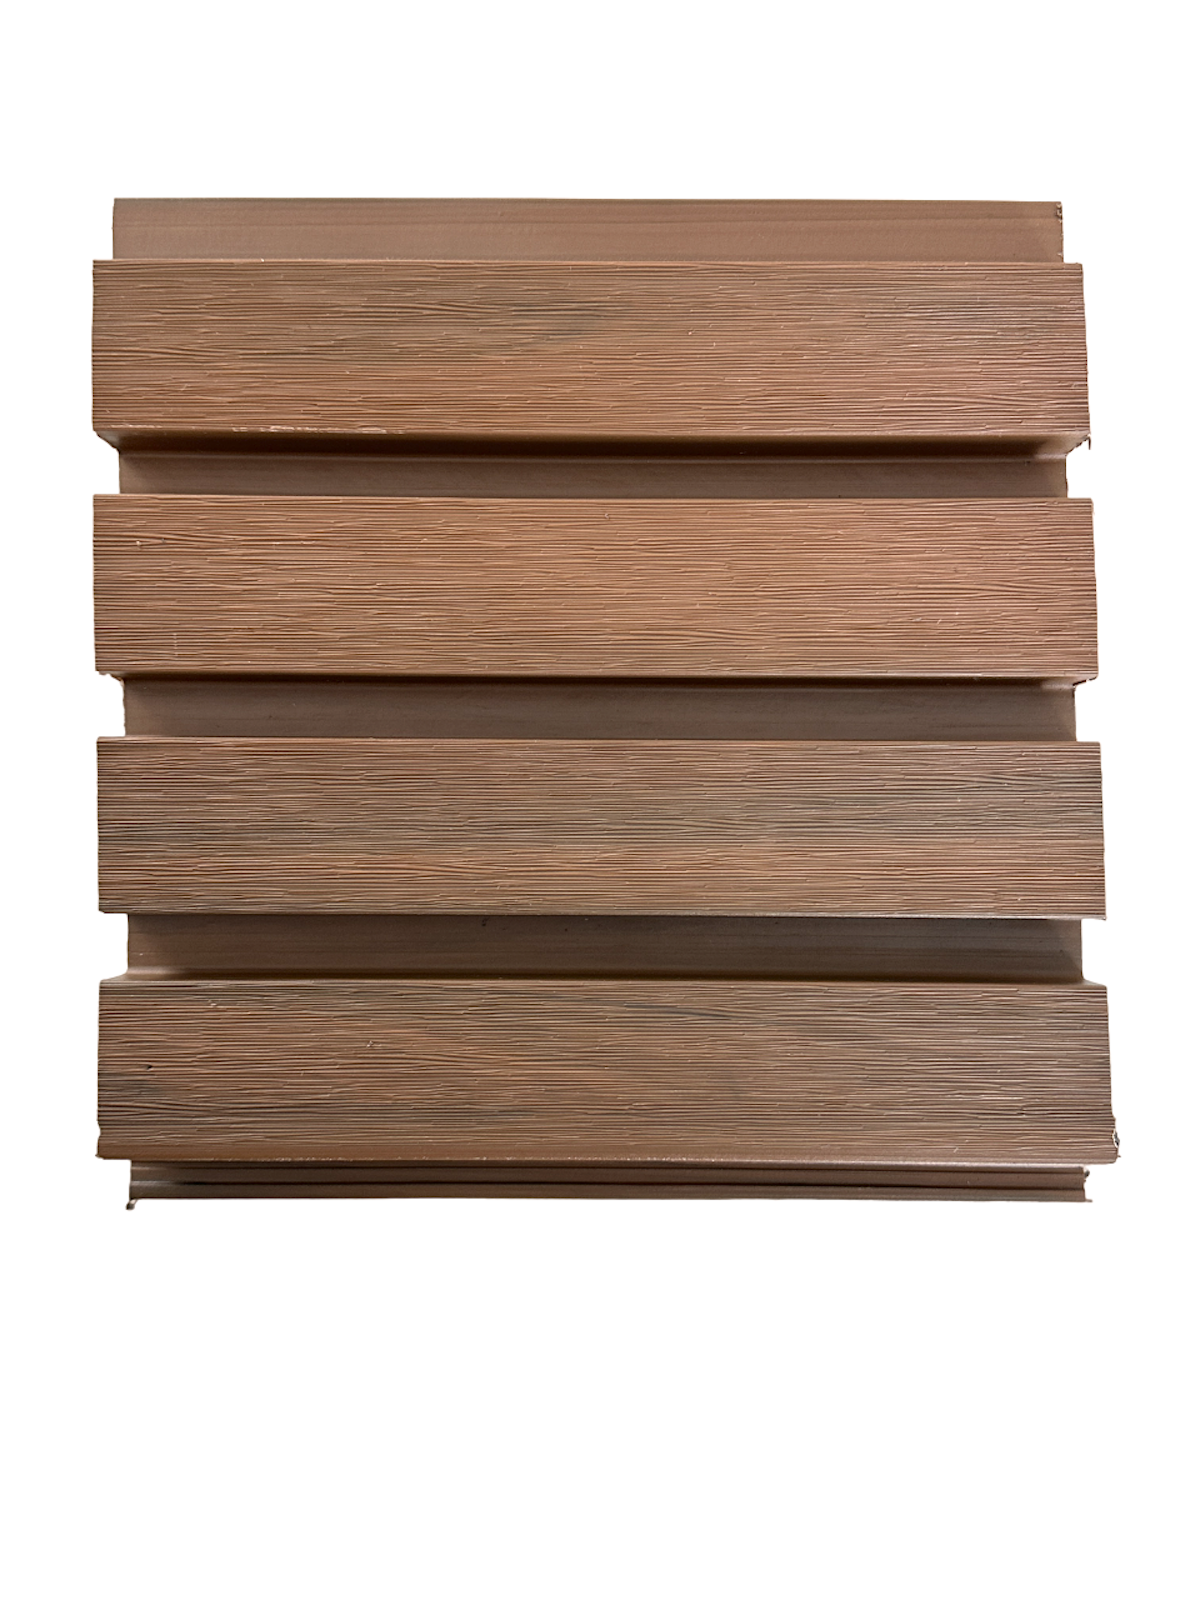 Teak Exterior Siding Panels Accent Wall Decor European Modern Wood Grain 8.5 in by 114 in